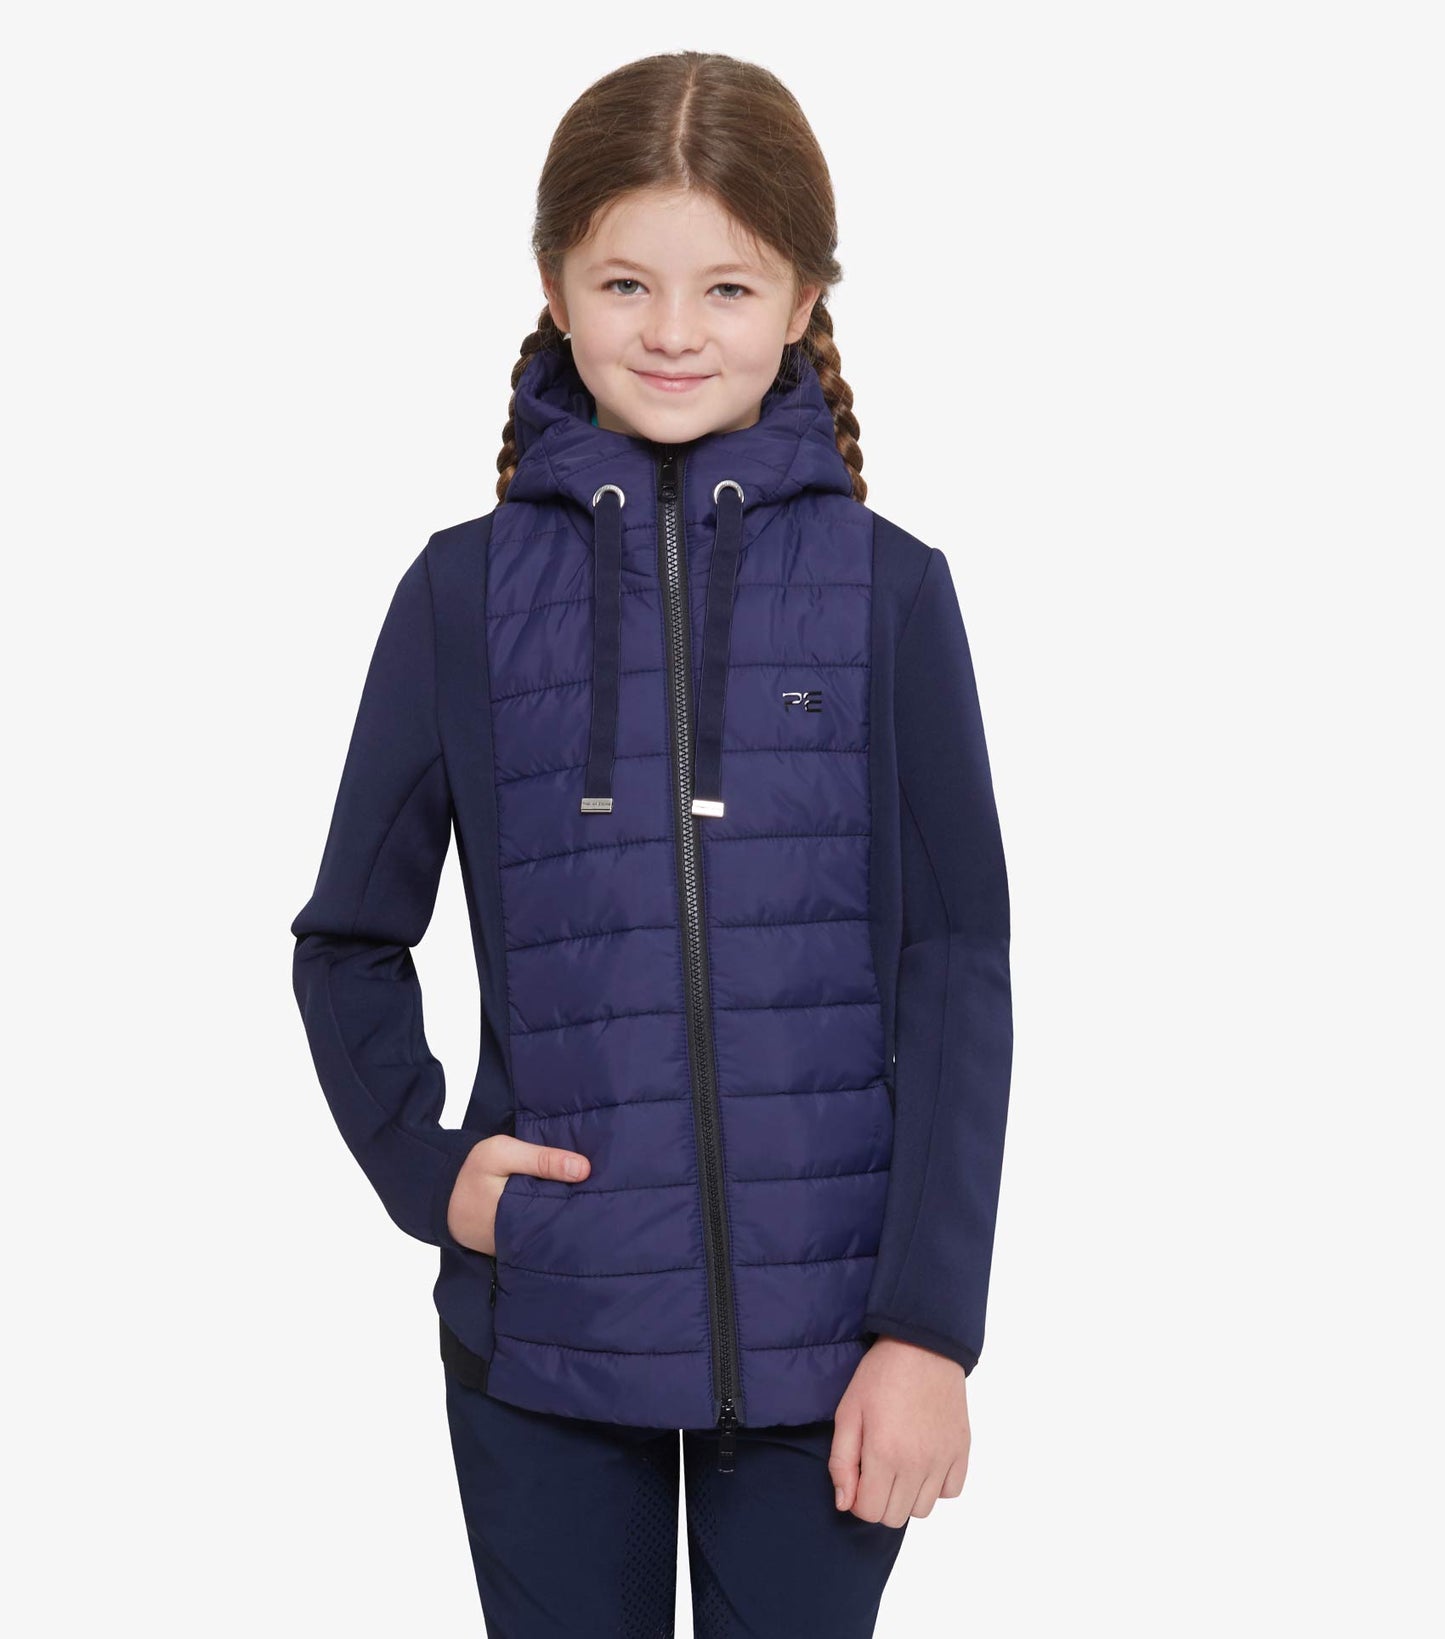 Premier Equine Arion Junior Riding Jacket With Hood (boys and girls)